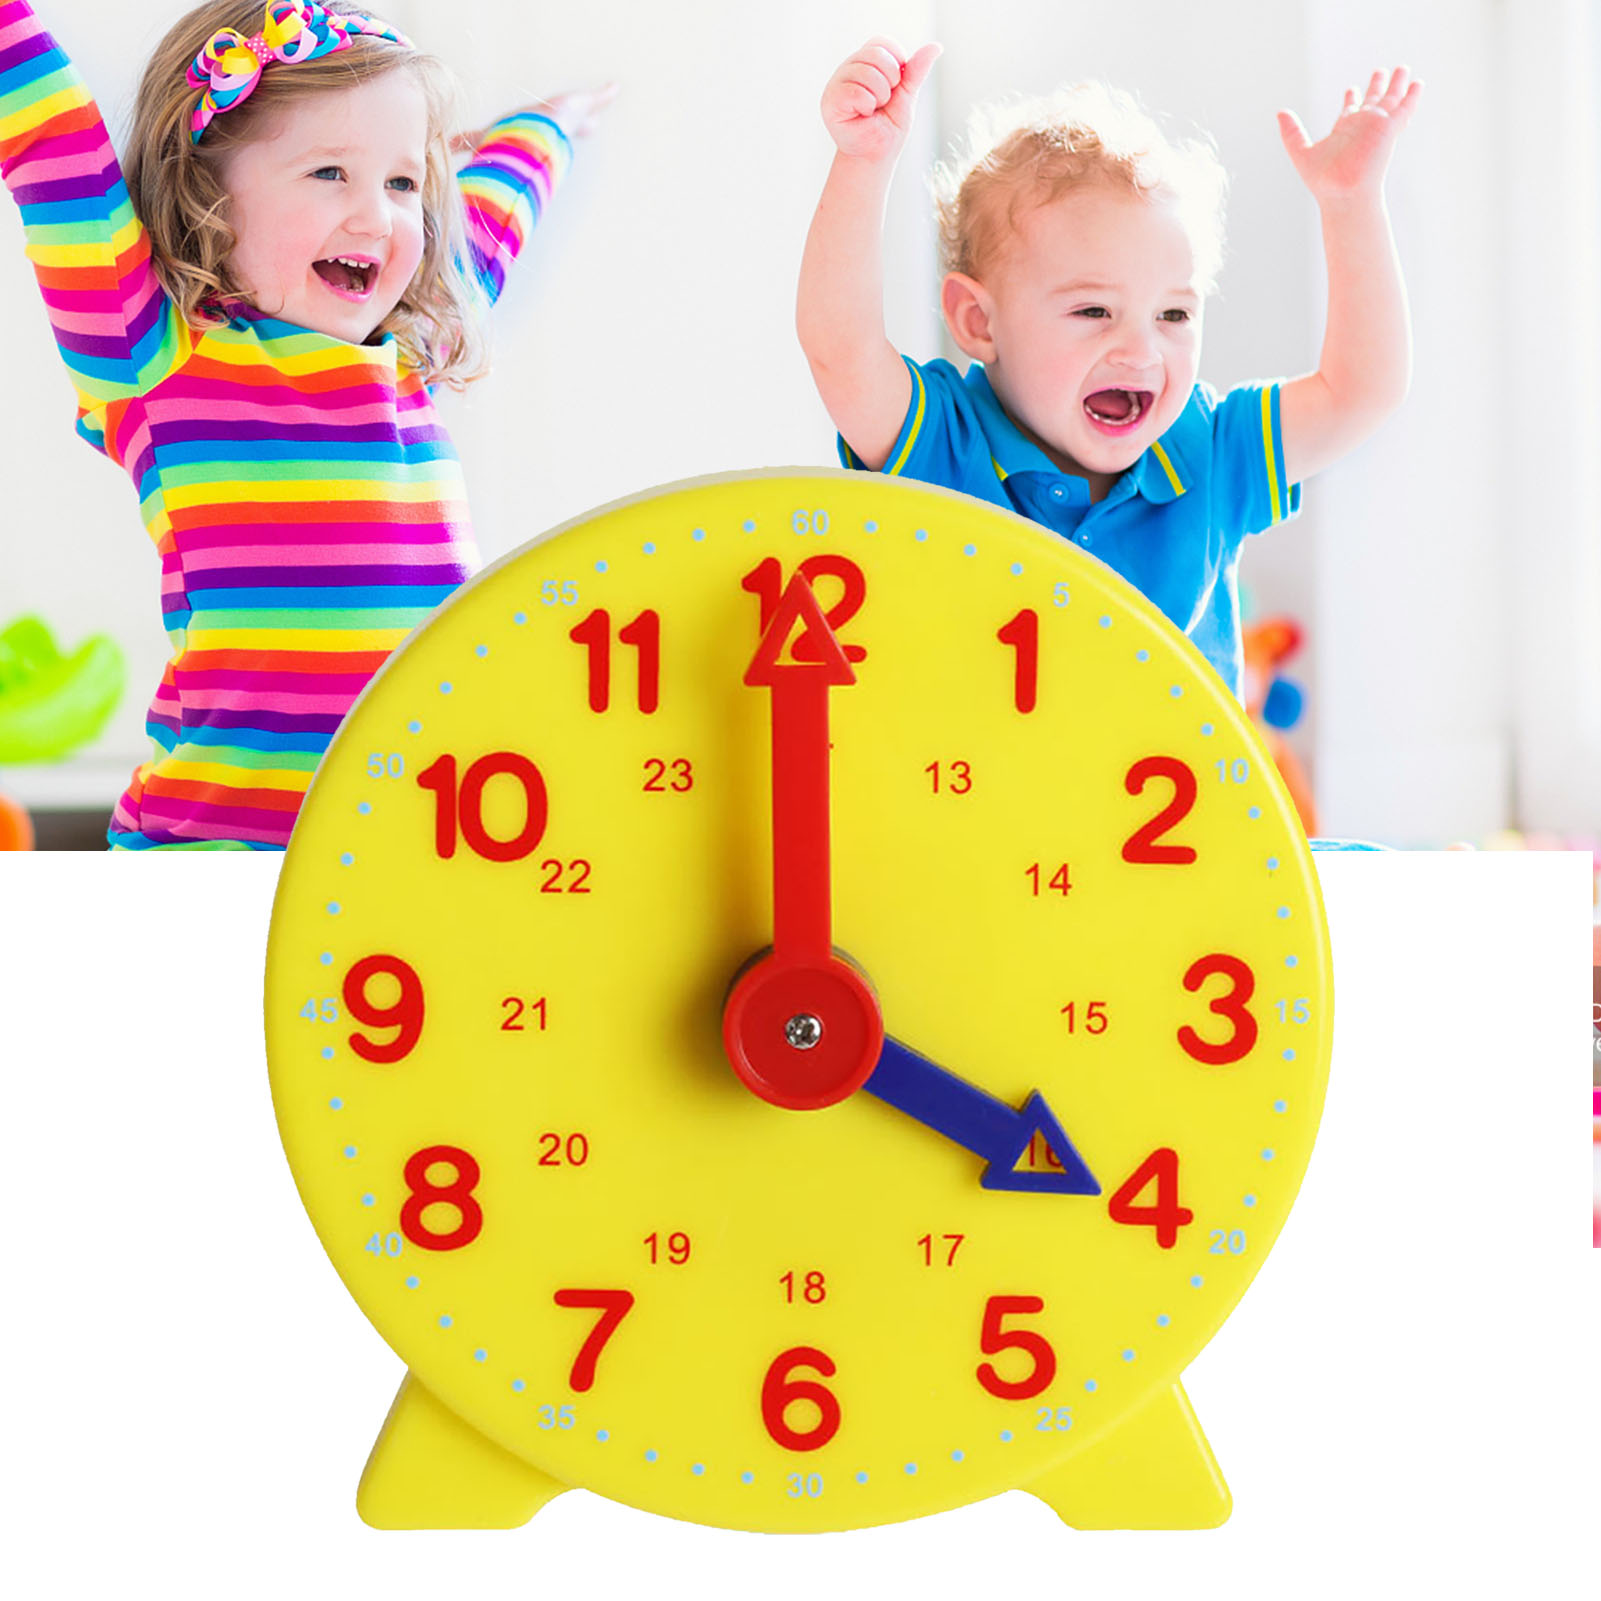 VEAREAR 10cm Plastic Clock Model Early Education Learning Kids Children Toy - image 5 of 6